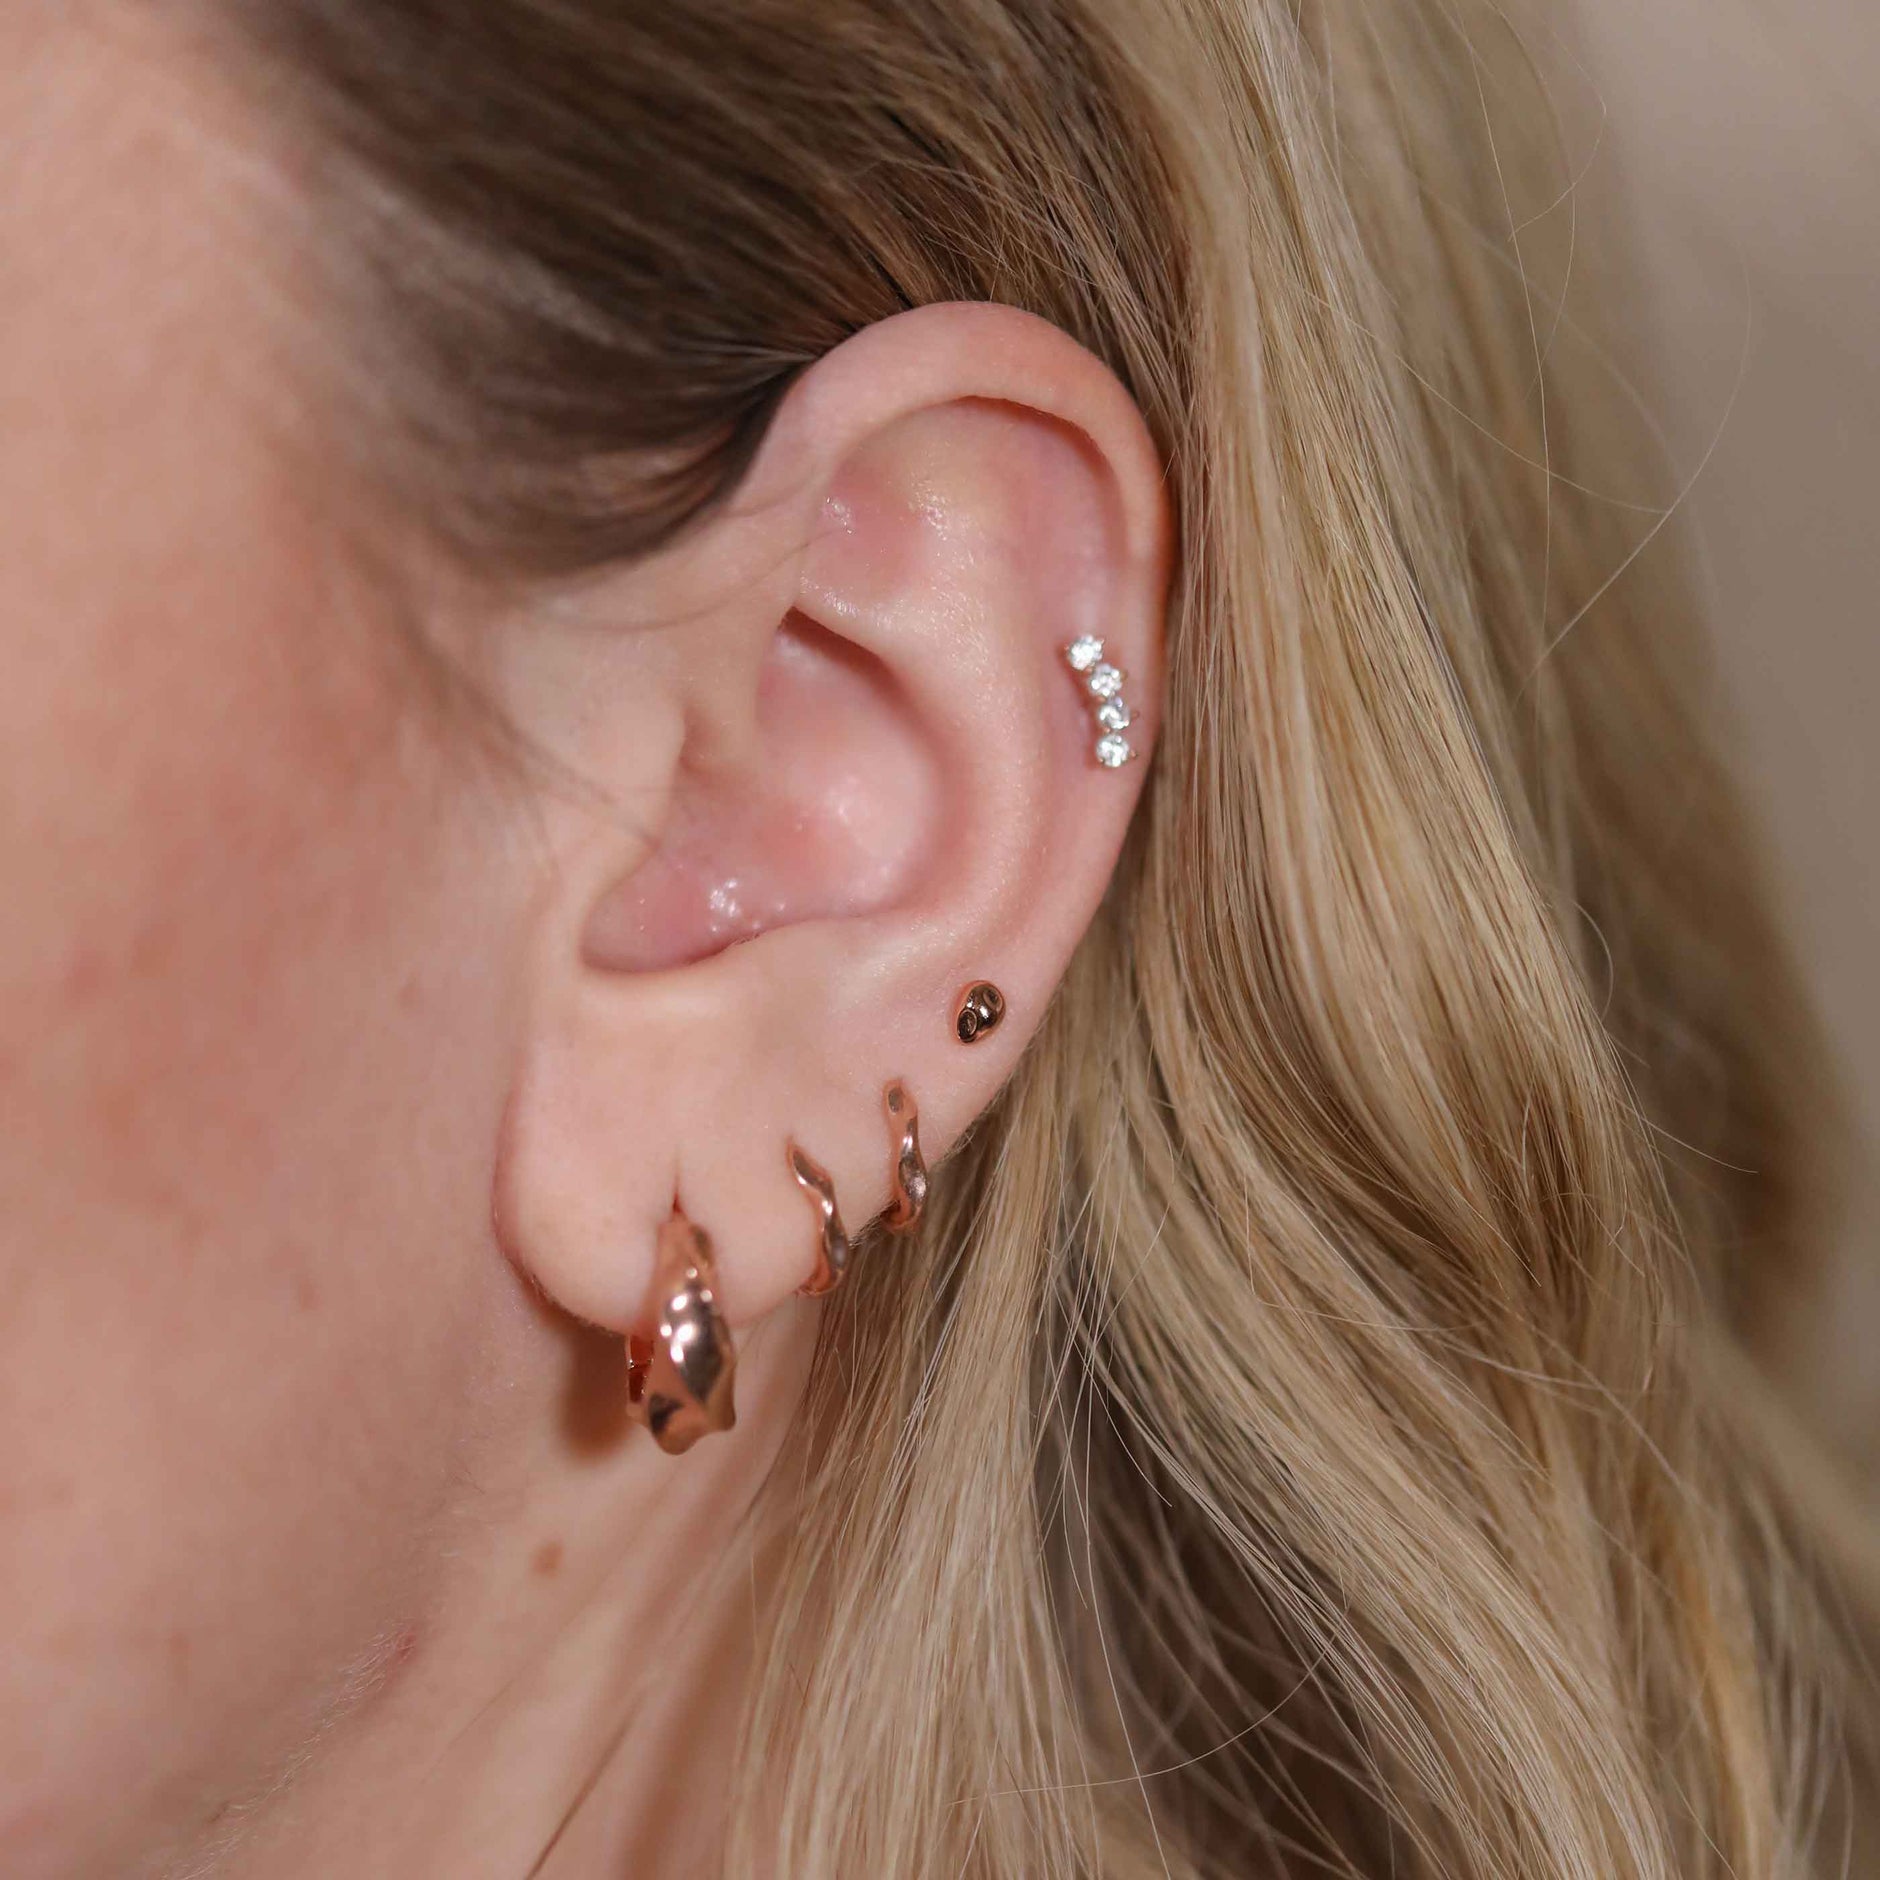 Molten Stud Earrings in Rose Gold worn with curved crystal barbell and elemental huggies